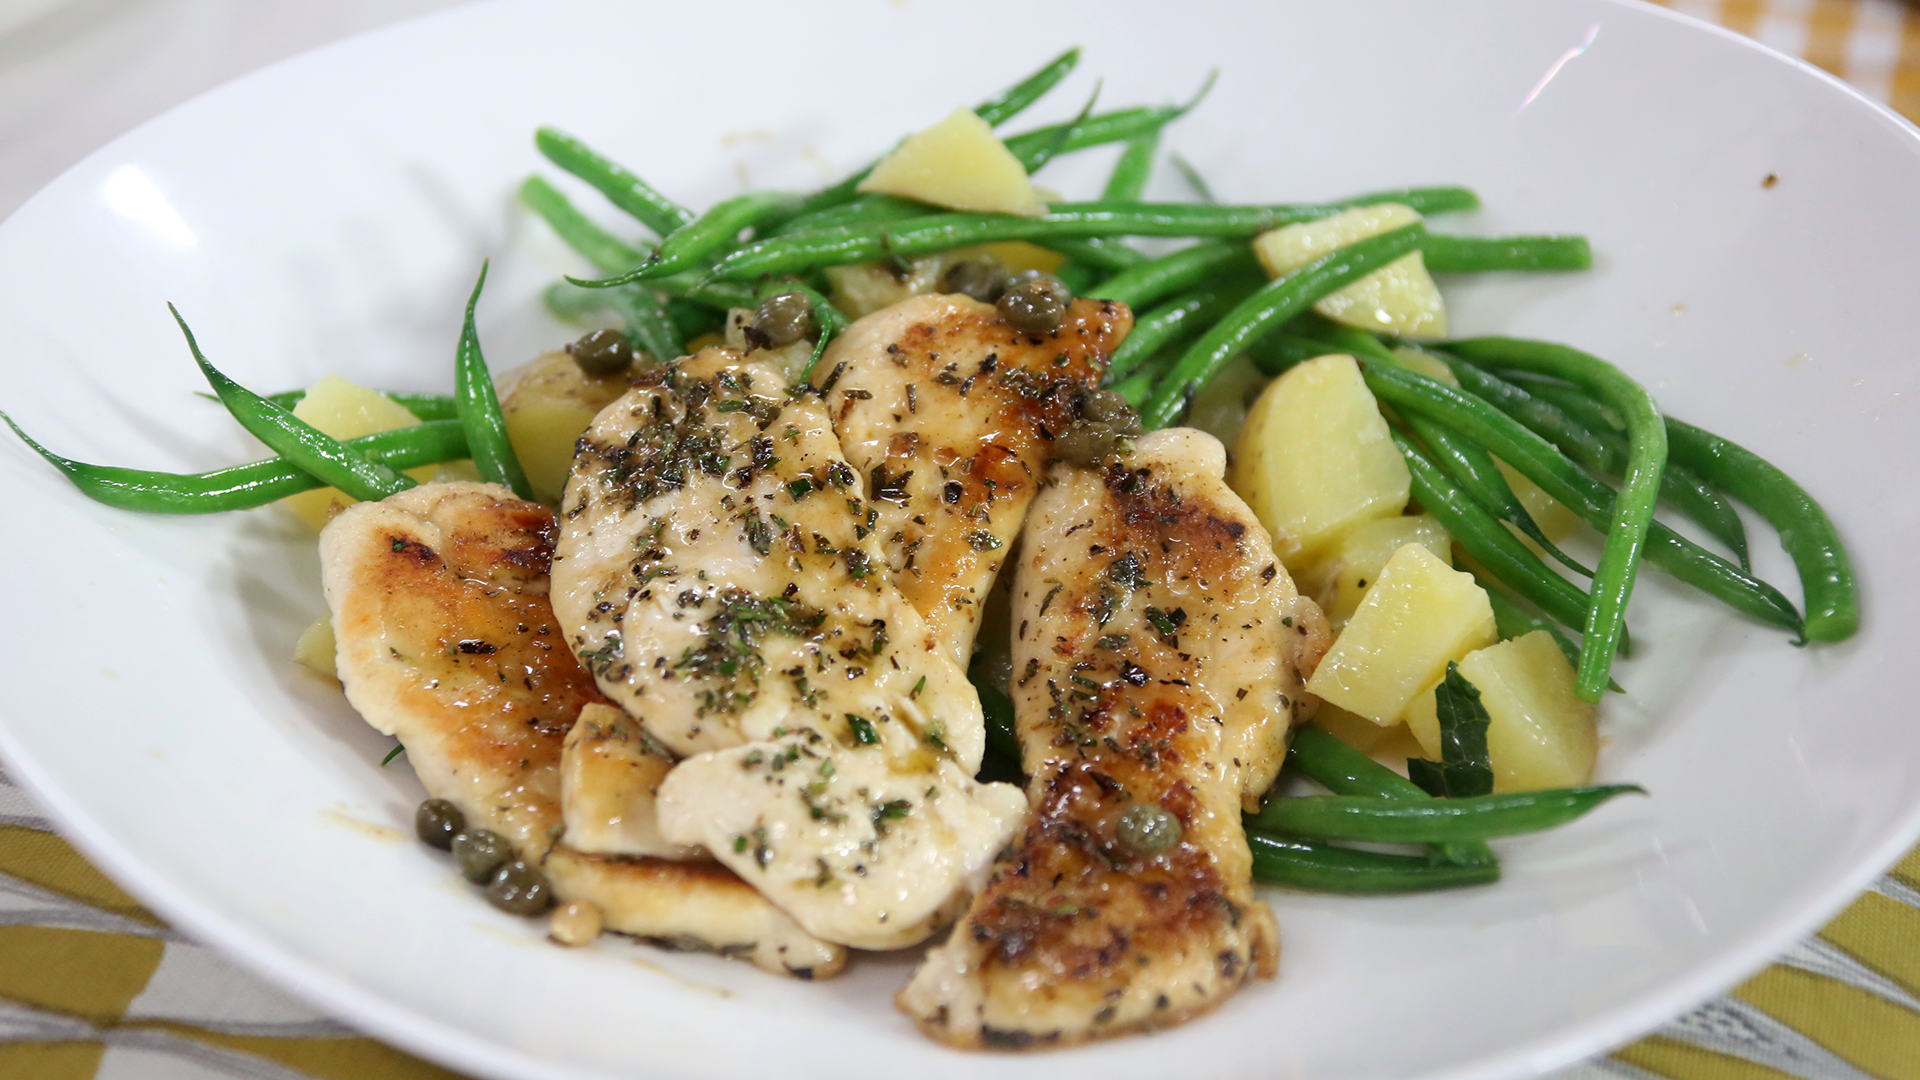 Lemony chicken tenders with green beans and diced potatoes